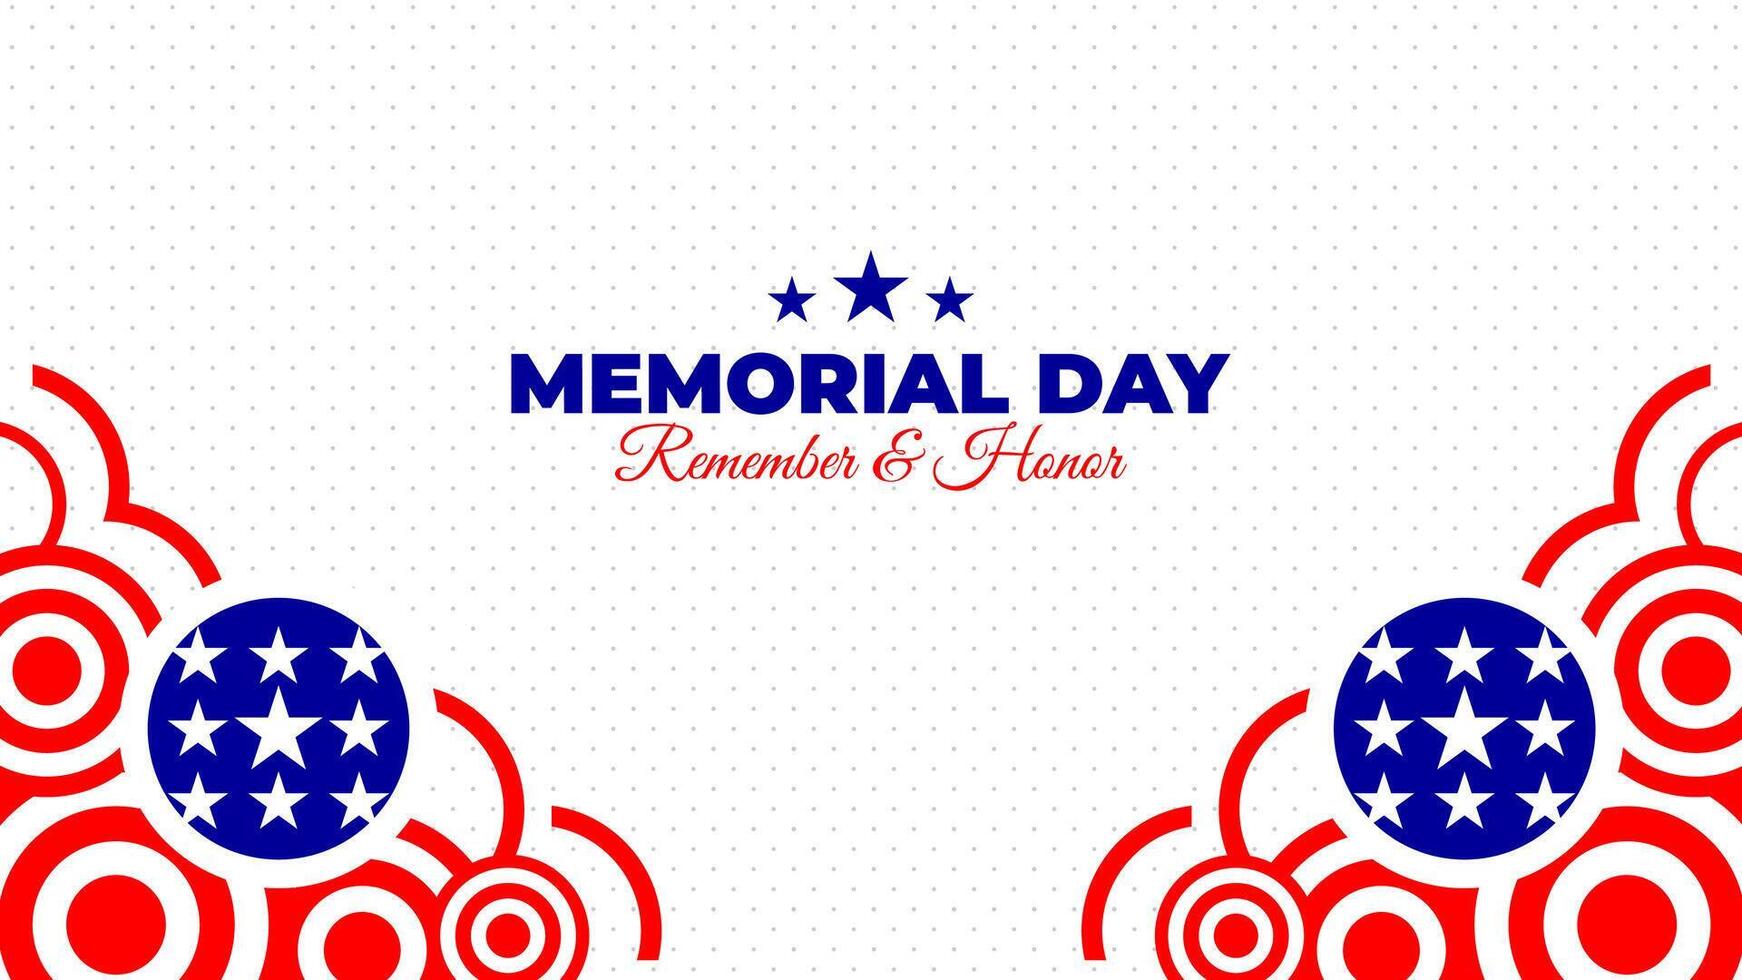 Memorial day background with colors of national flag of United States vector